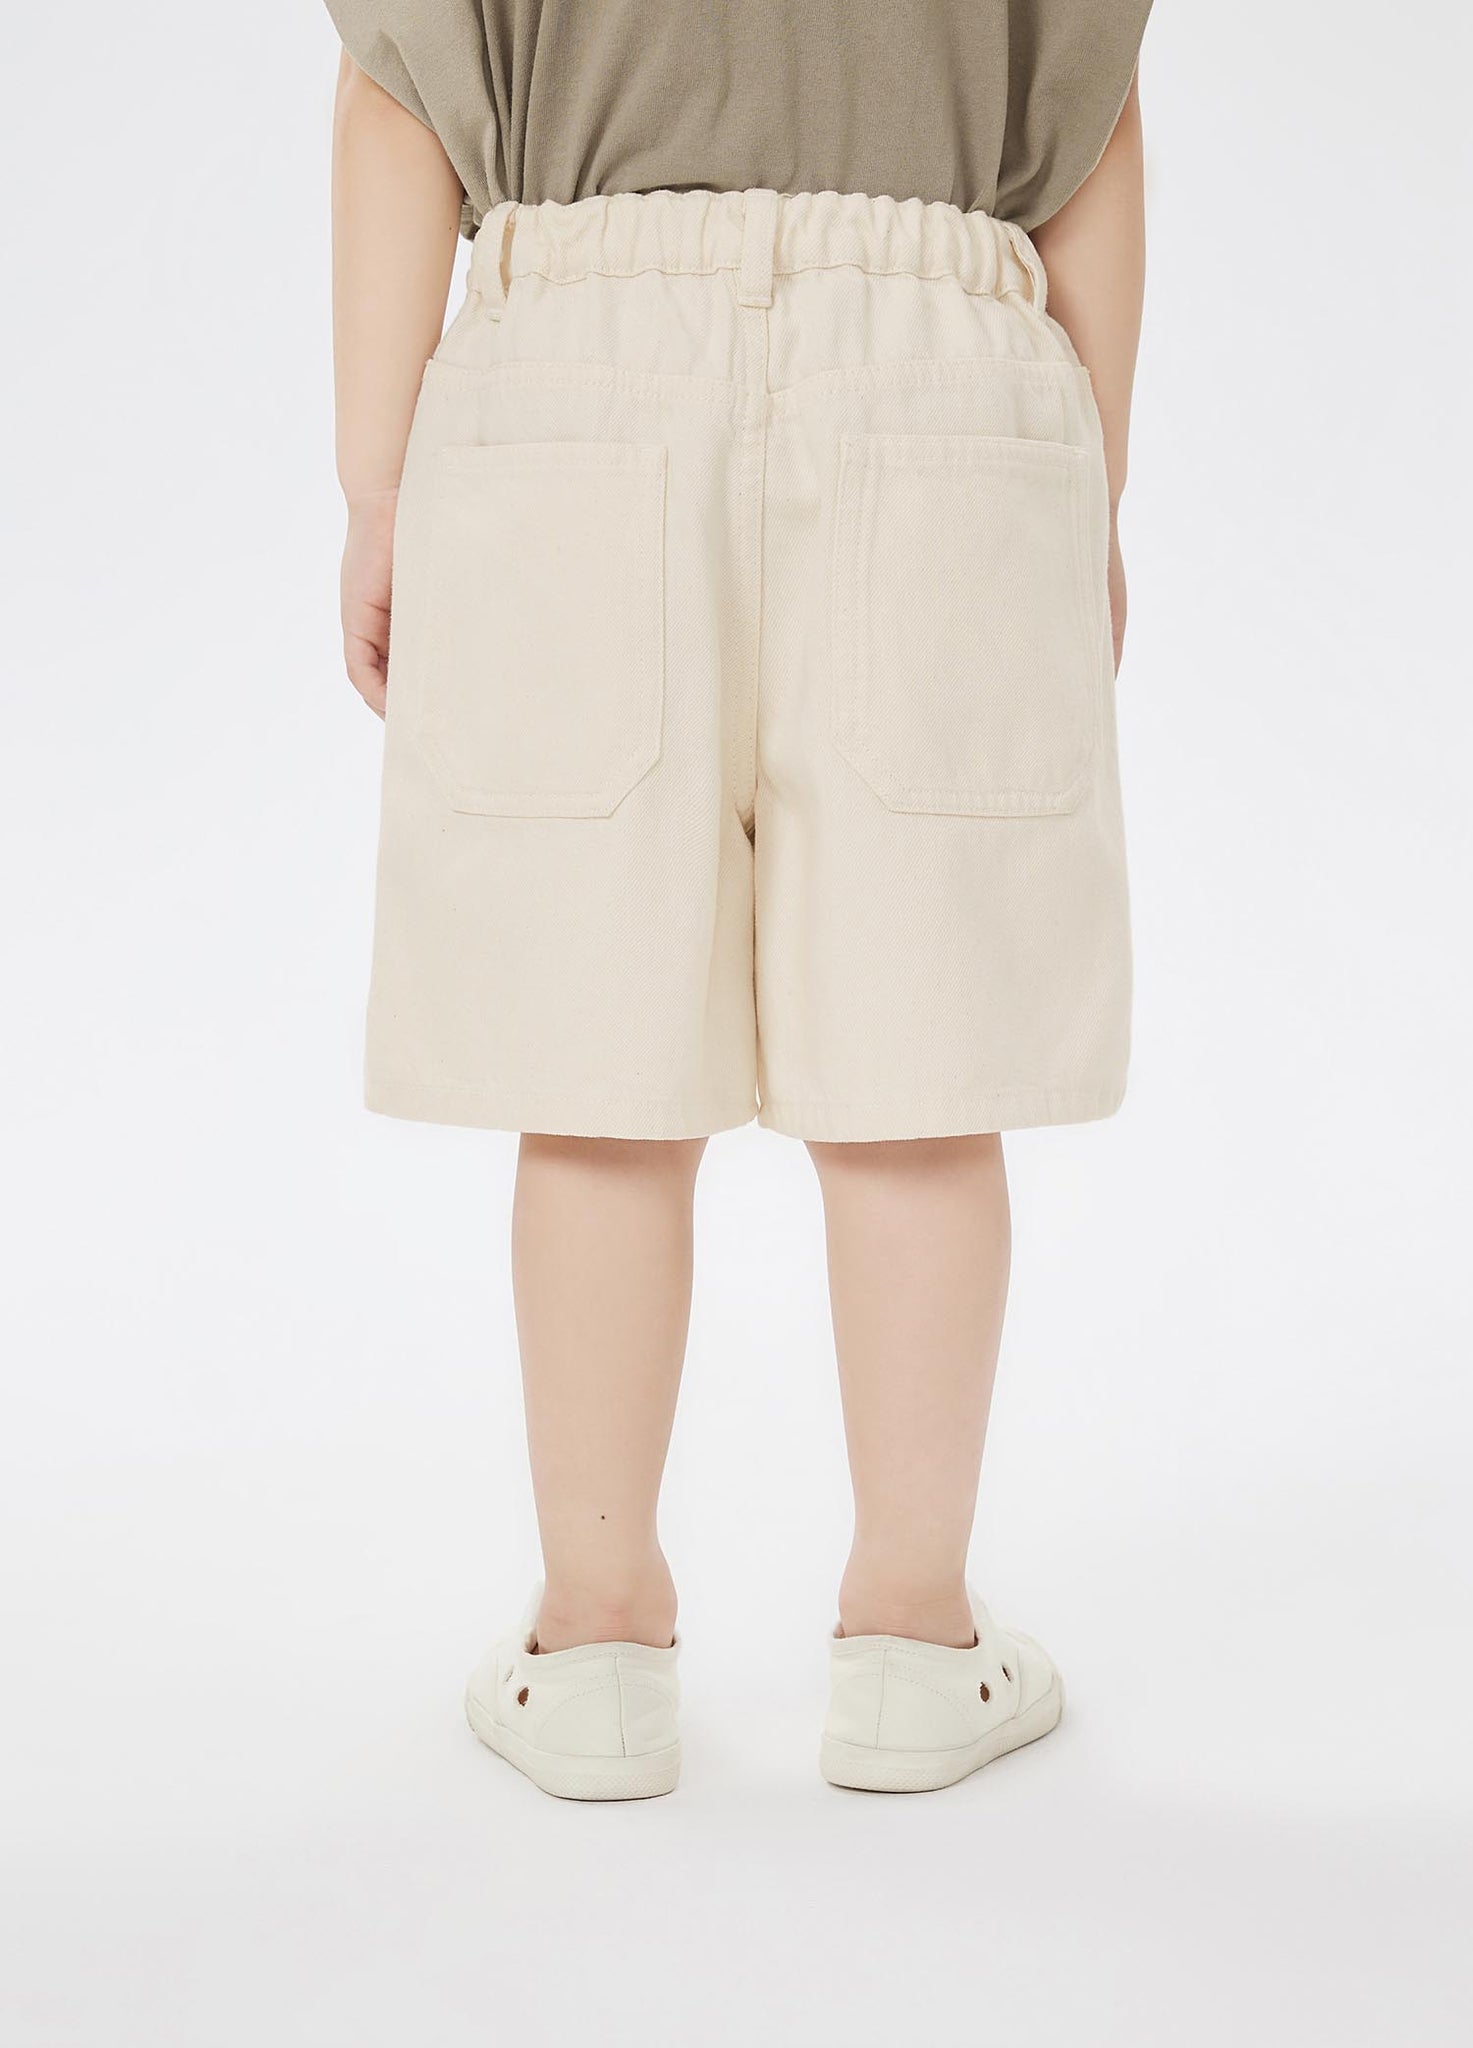 Shorts / jnby by JNBY Loose Fit Denim Shorts